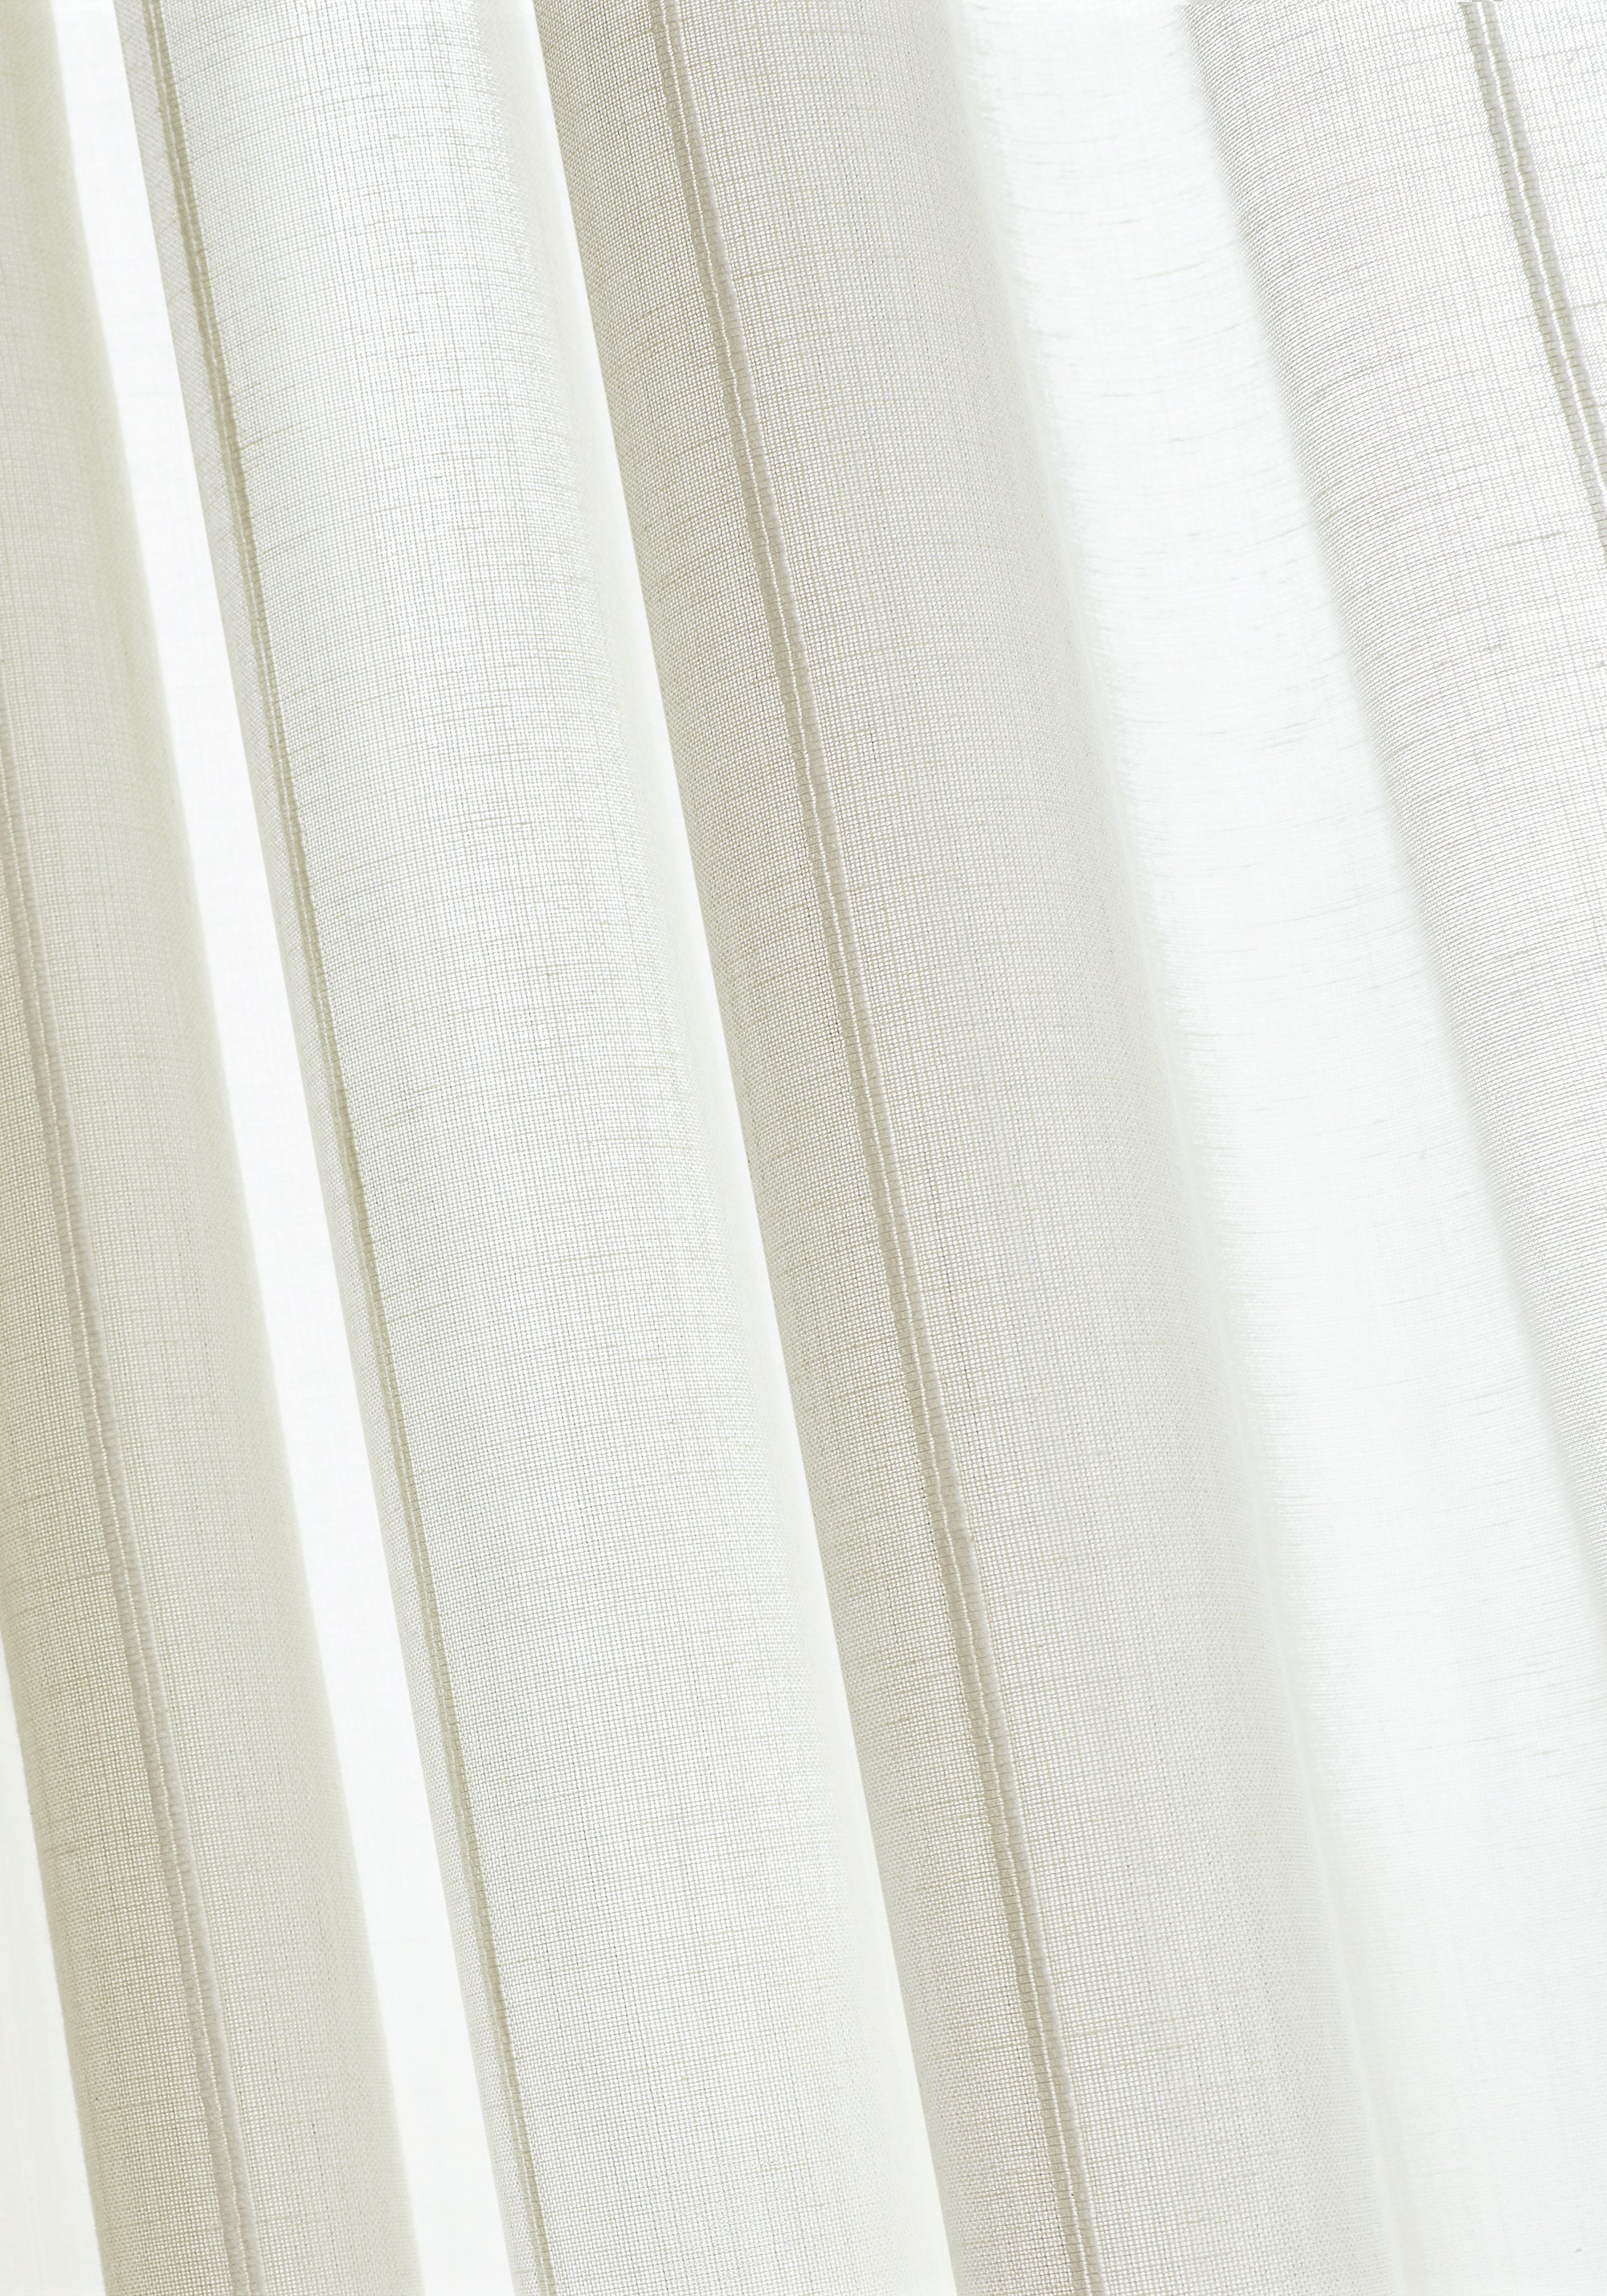 Detail of Berkshire Stripe woven fabric in Ivory by Thibaut